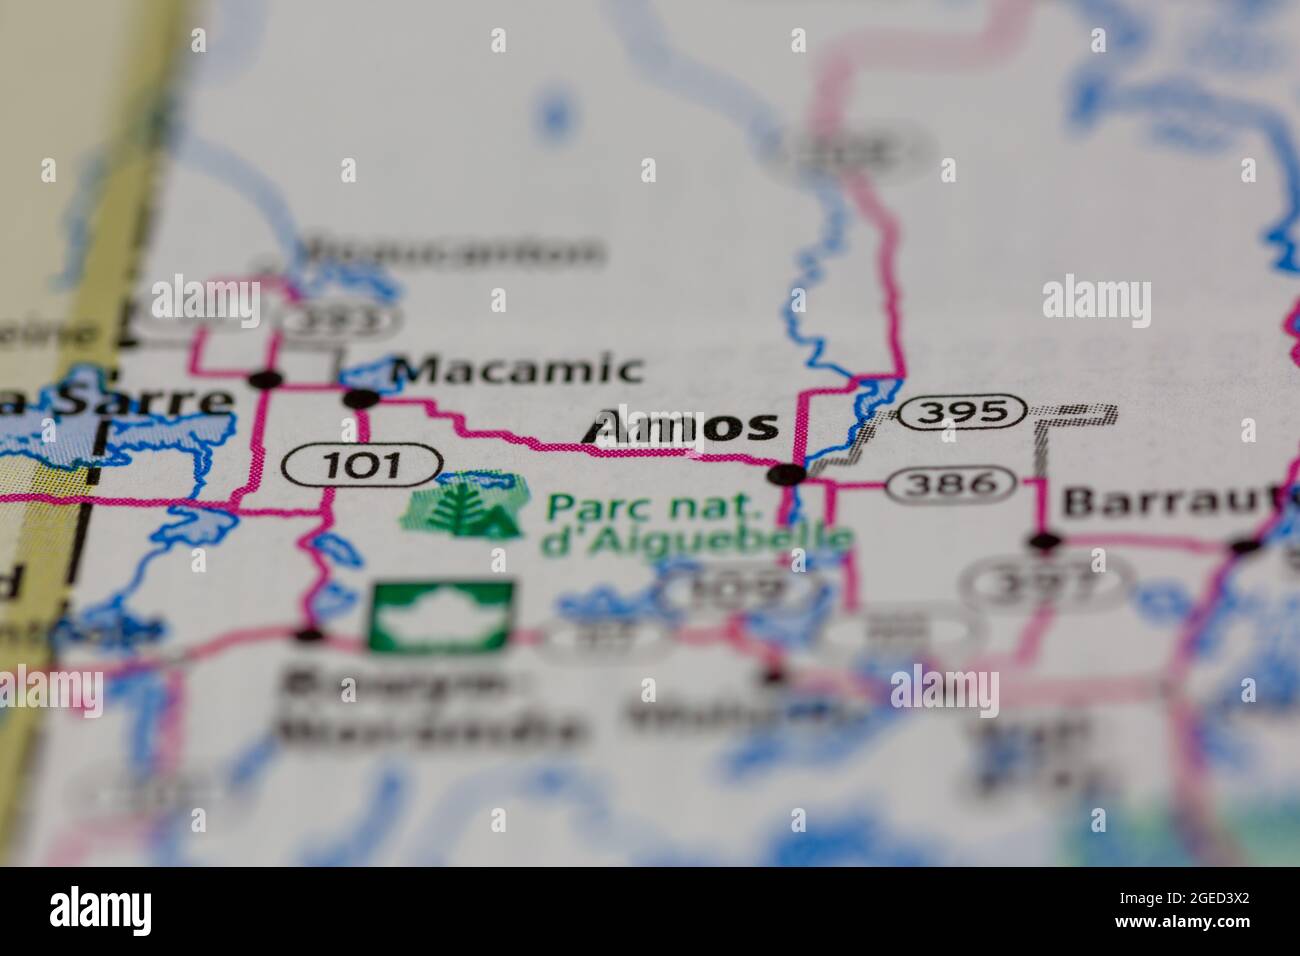 Amos Quebec Canada shown on a road map or Geography map Stock Photo